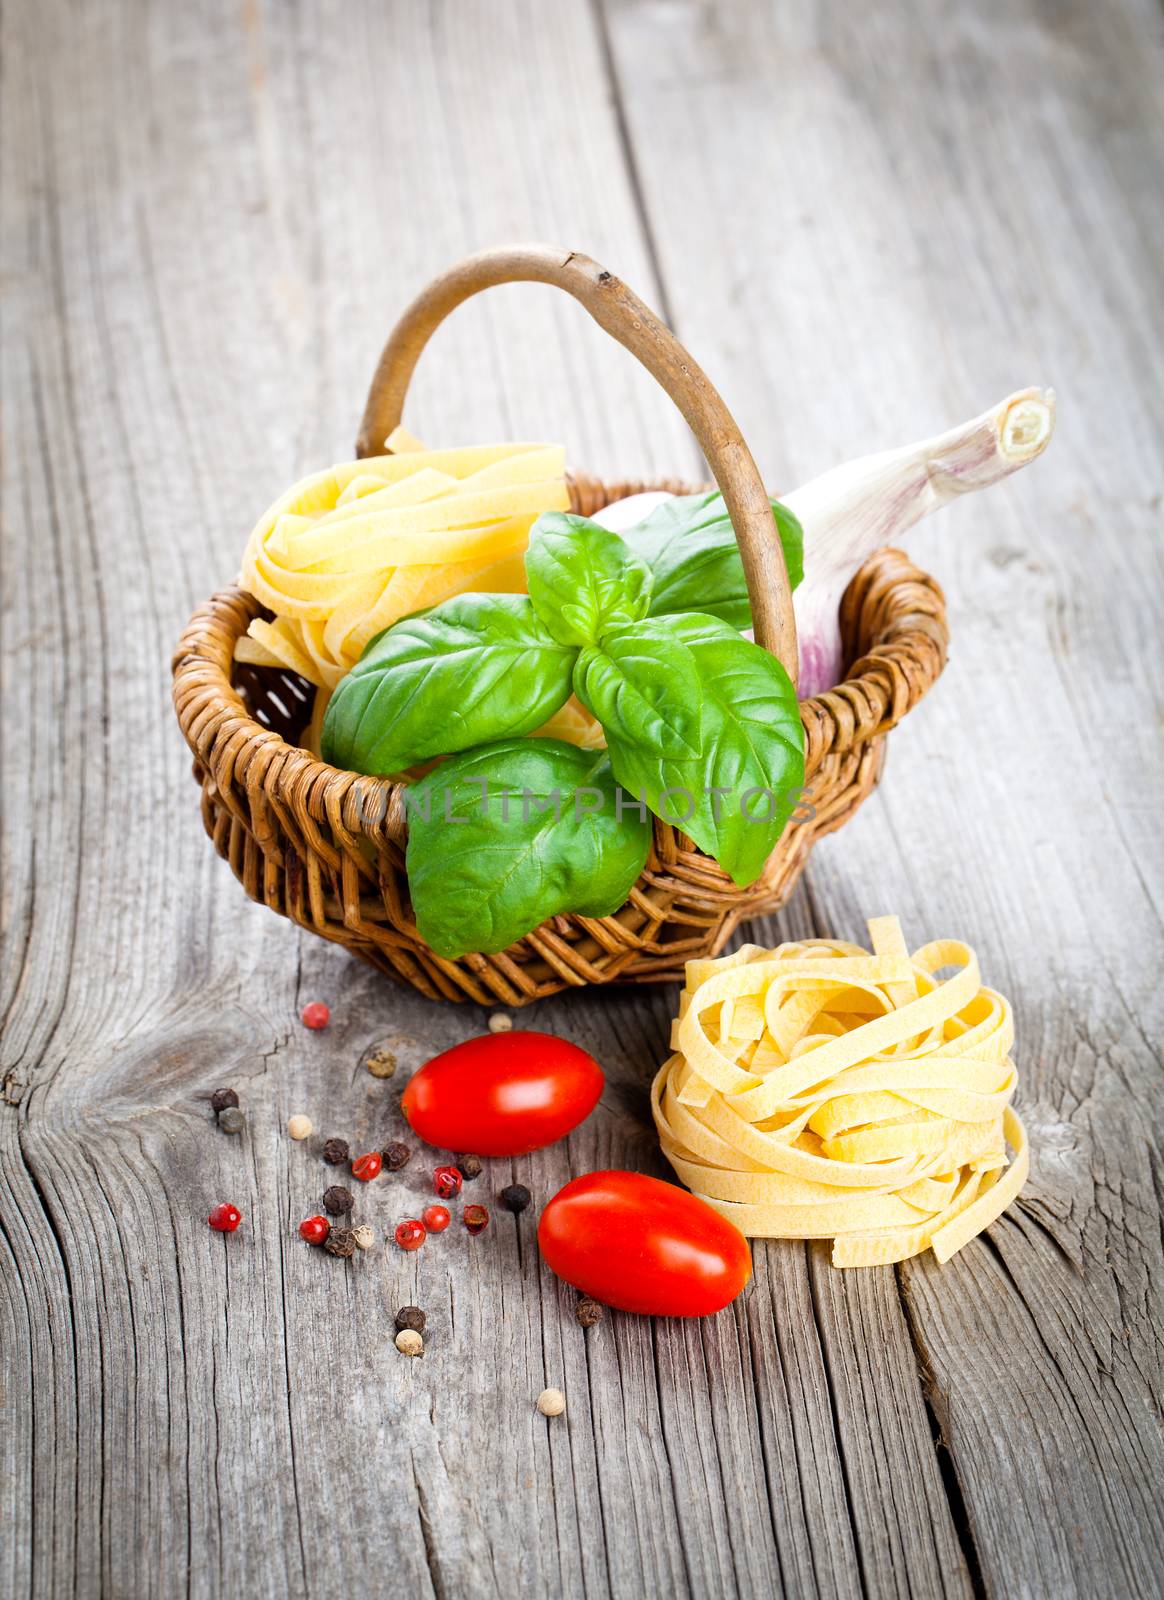 Italian pasta fettuccine nest with garlic, tomatoes and fresh basil leaves, on wooden background